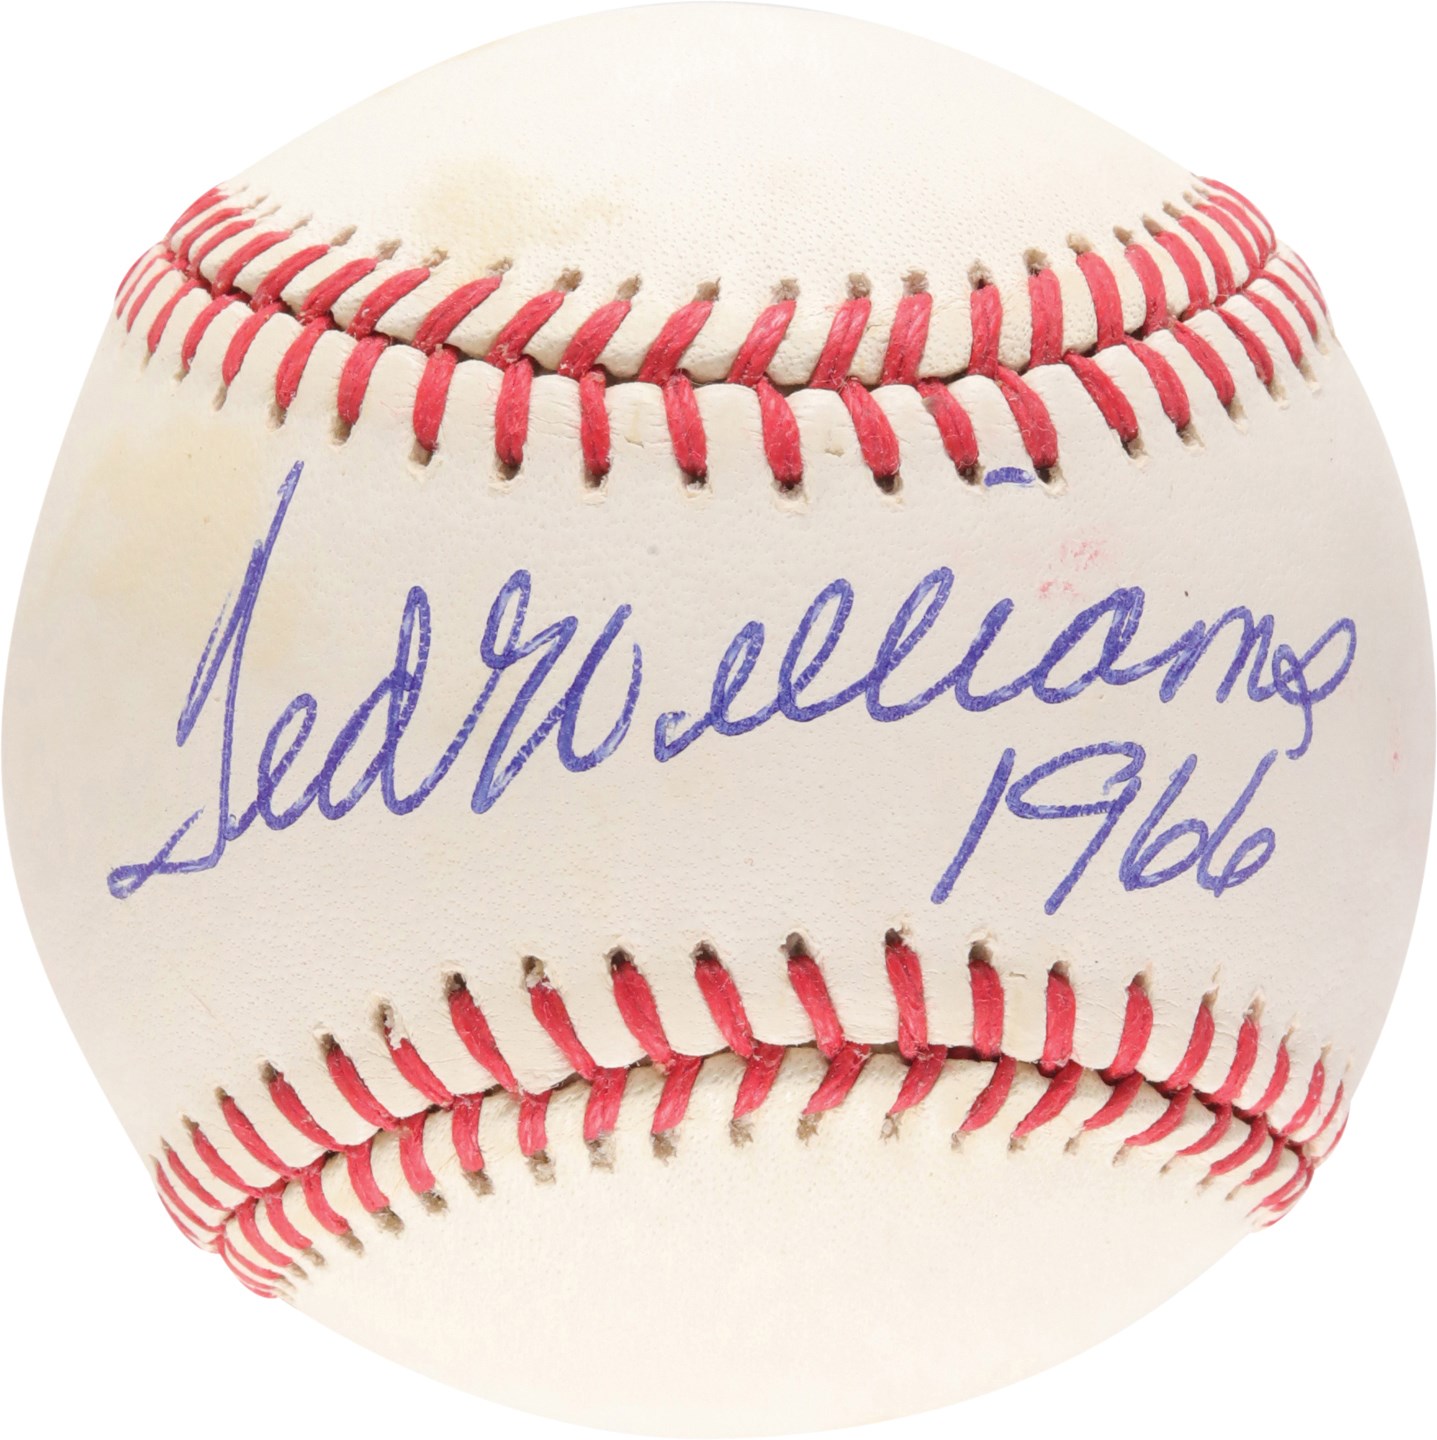 - Ted Williams Single-Signed Baseball with HOF Year 1966 (PSA MINT 9 Auto)